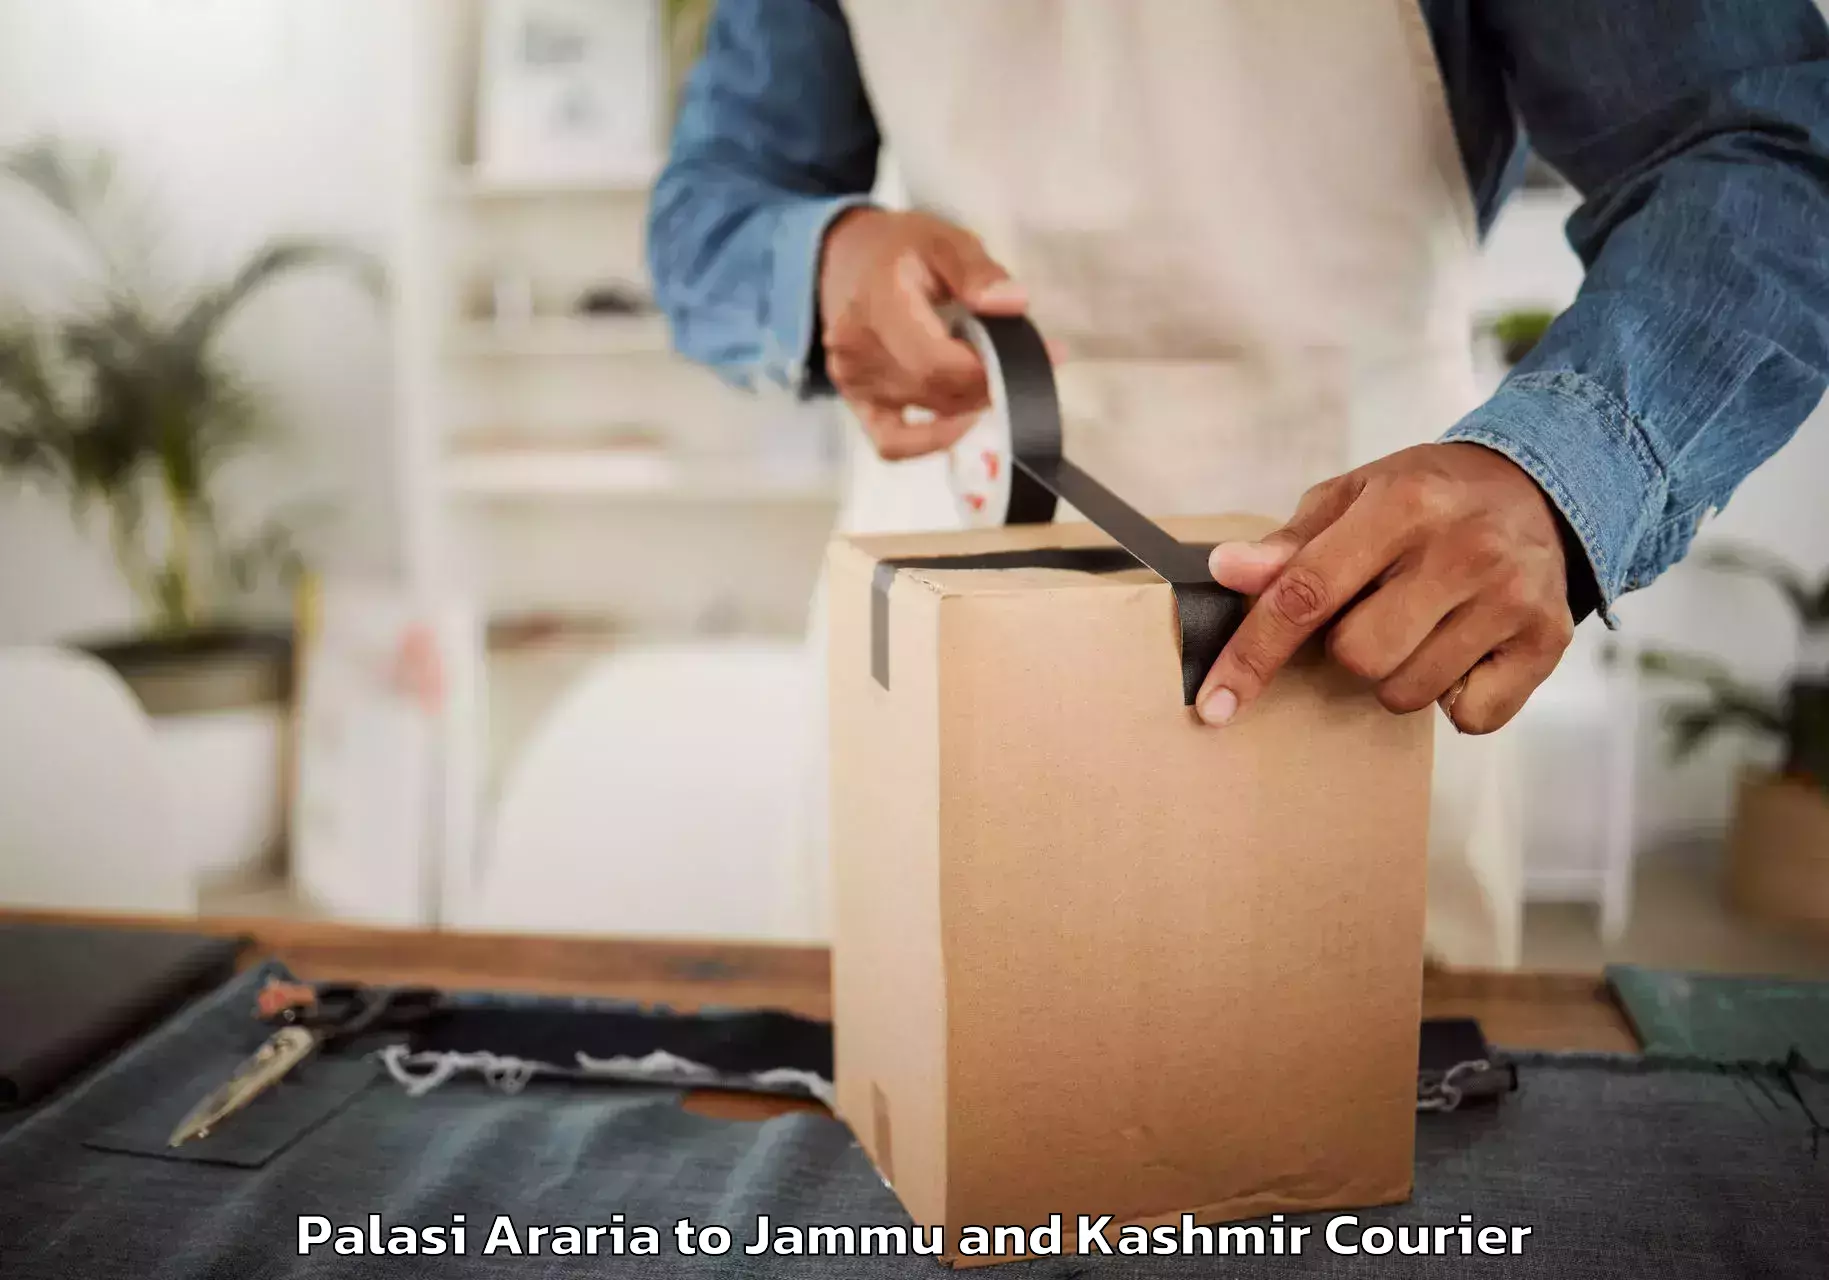 Furniture delivery service Palasi Araria to Budgam